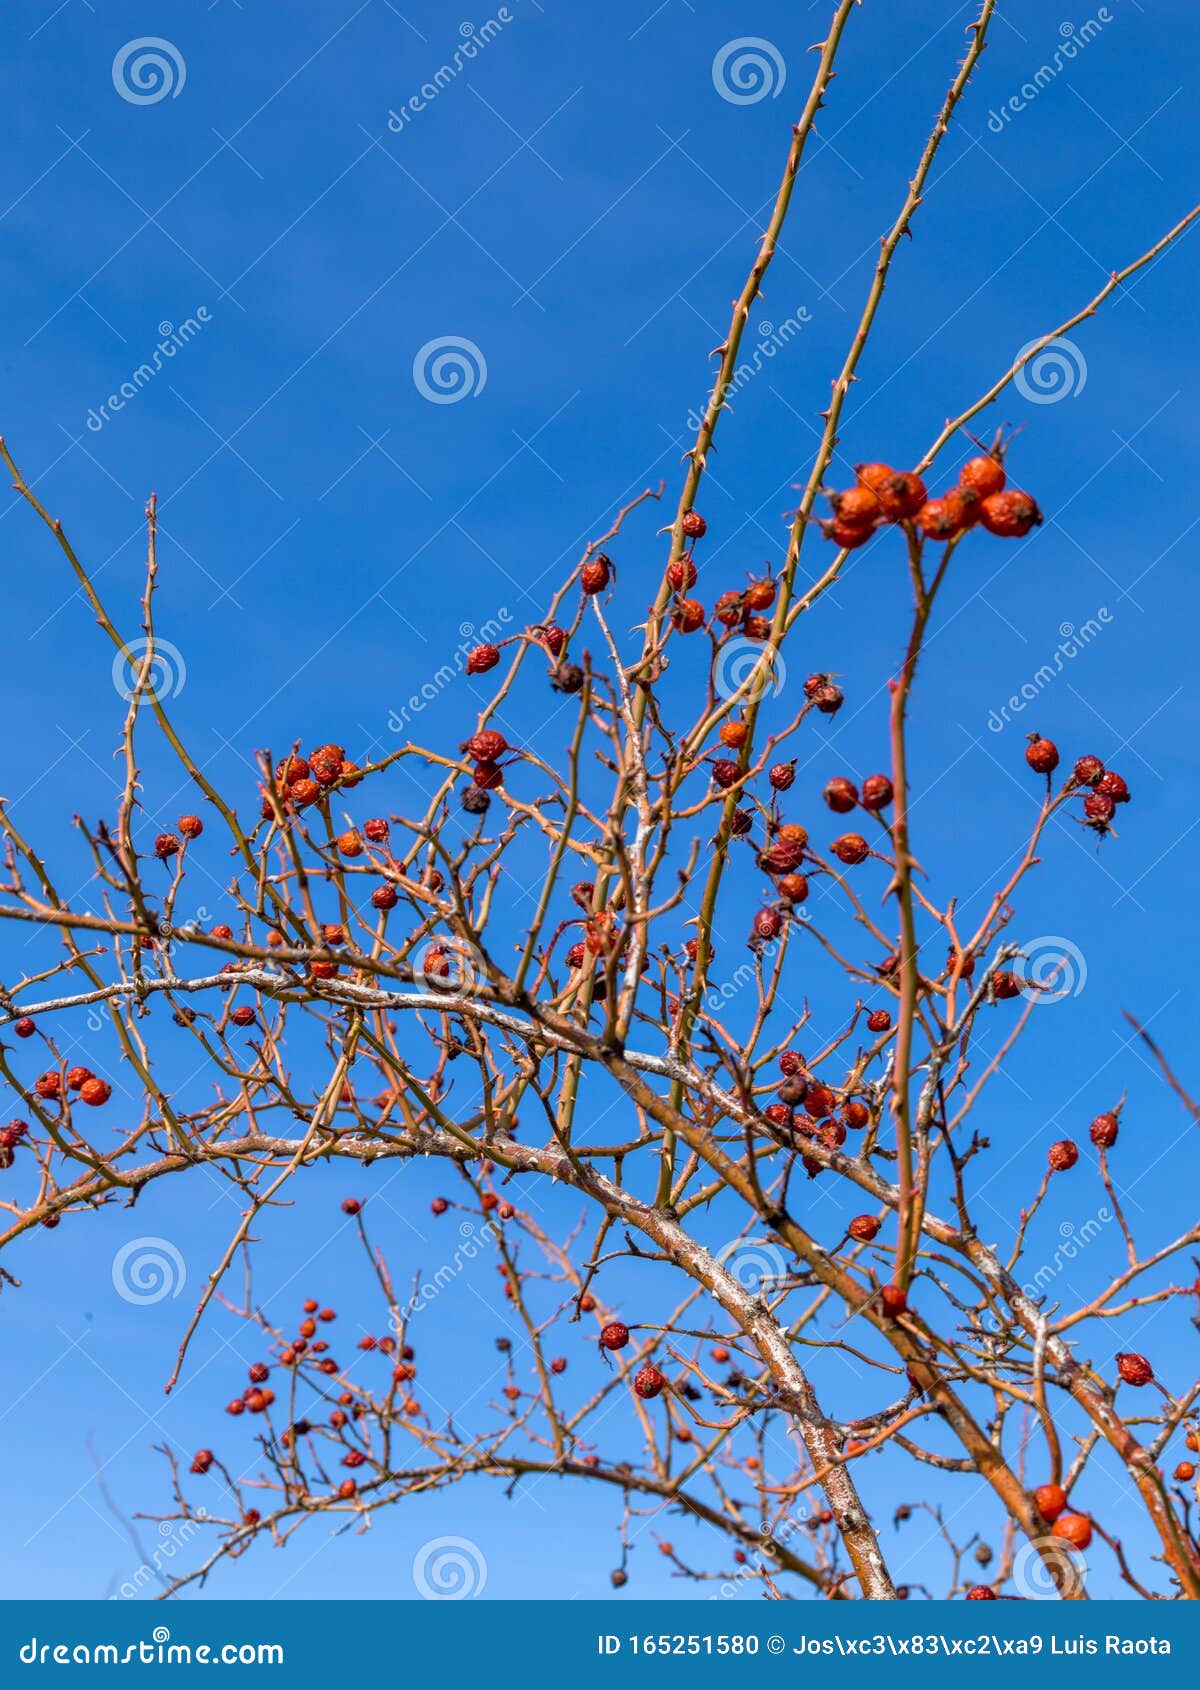 the rosehip, also called rose haw and rose hep